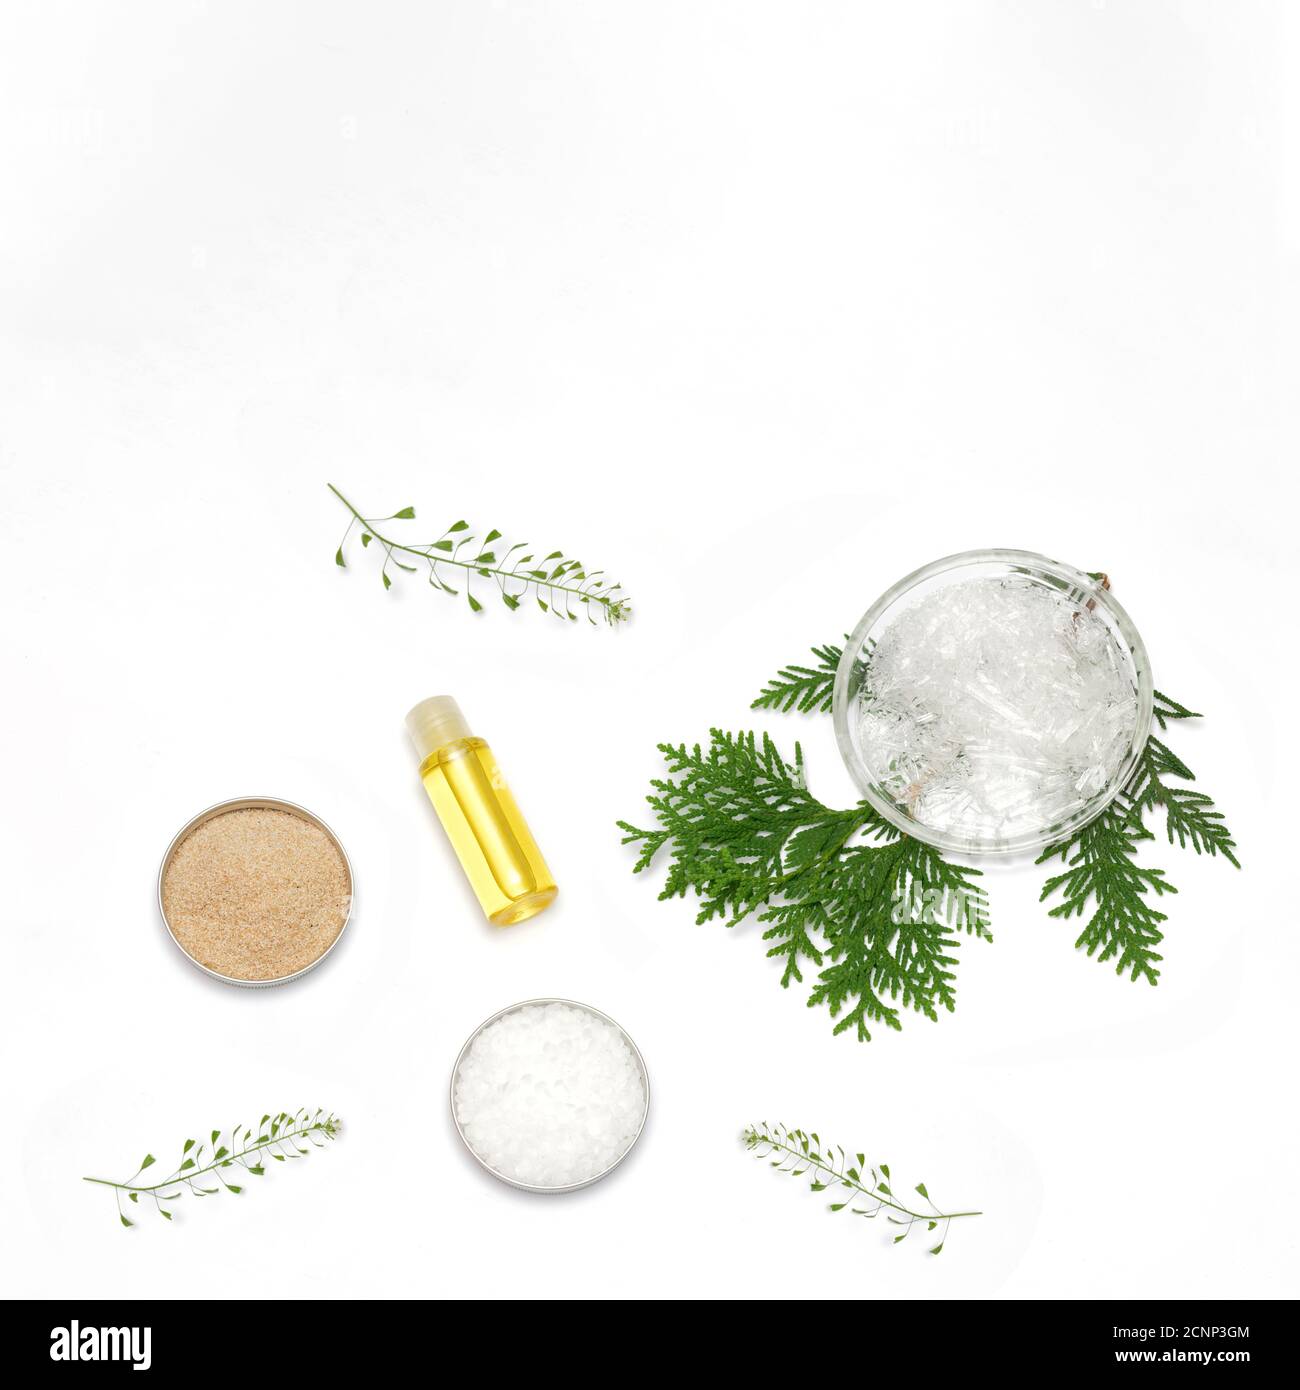 Ingredients for the production of cosmetics on a white background. Herbal powders, dried flowers, menthol crystals, oil. Natural cosmetics concept. Stock Photo